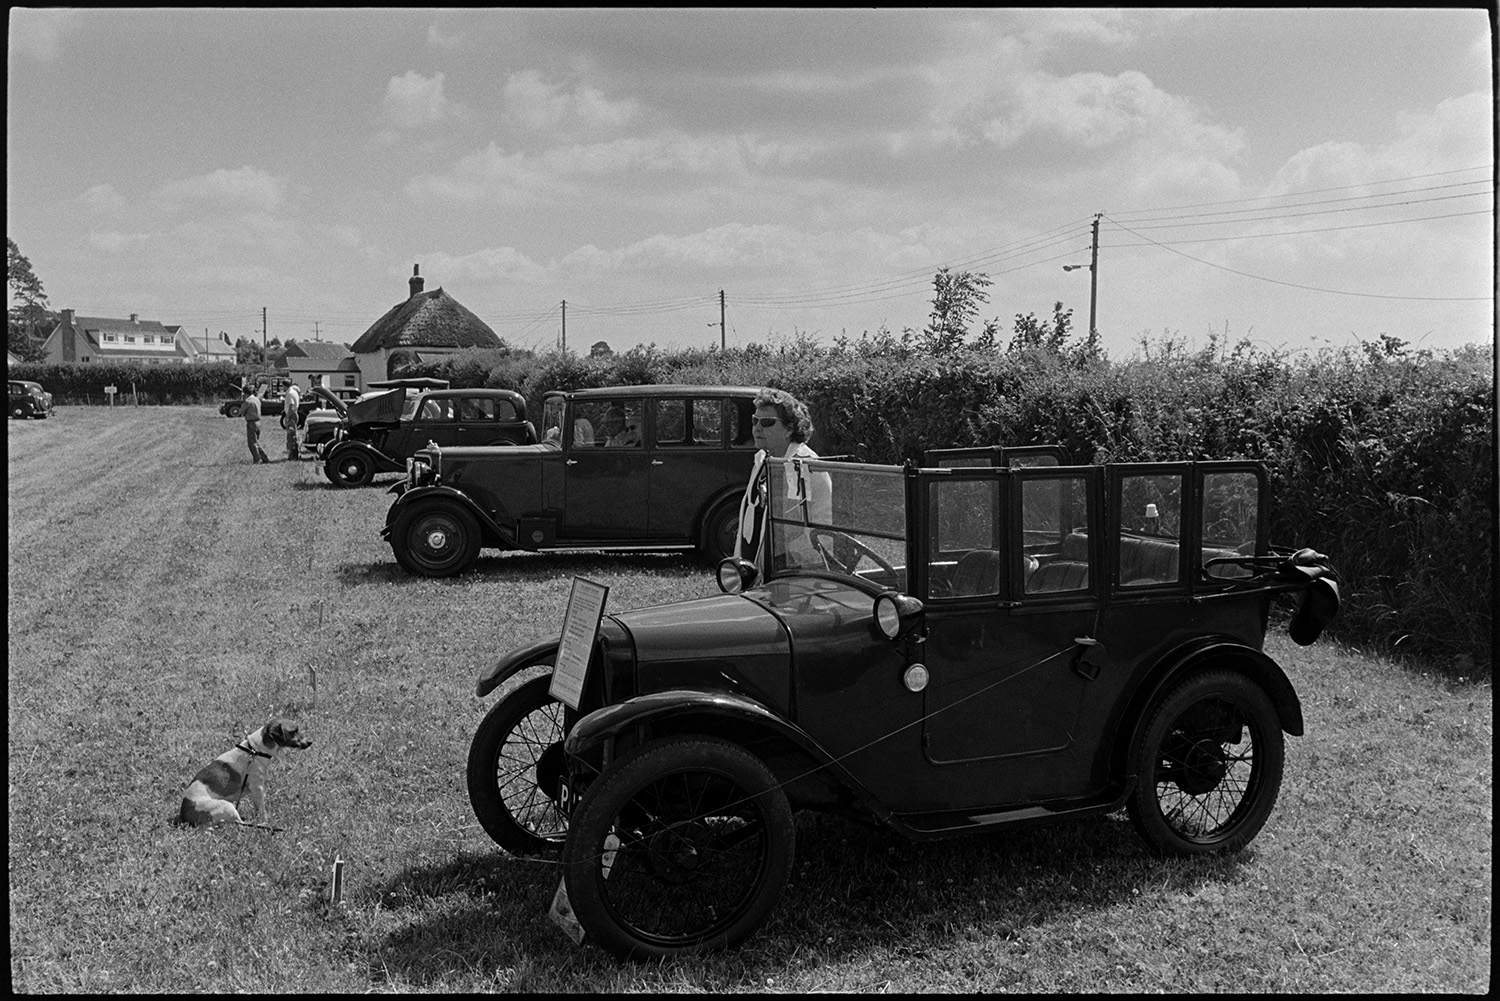 Country fair, vintage cars, sheep being rounded up for show.
[Vintage cars on display in a field at Ashreigney Country Fair. A woman and a small dog are next to an open top vintage car. Village houses are visible in the background.]